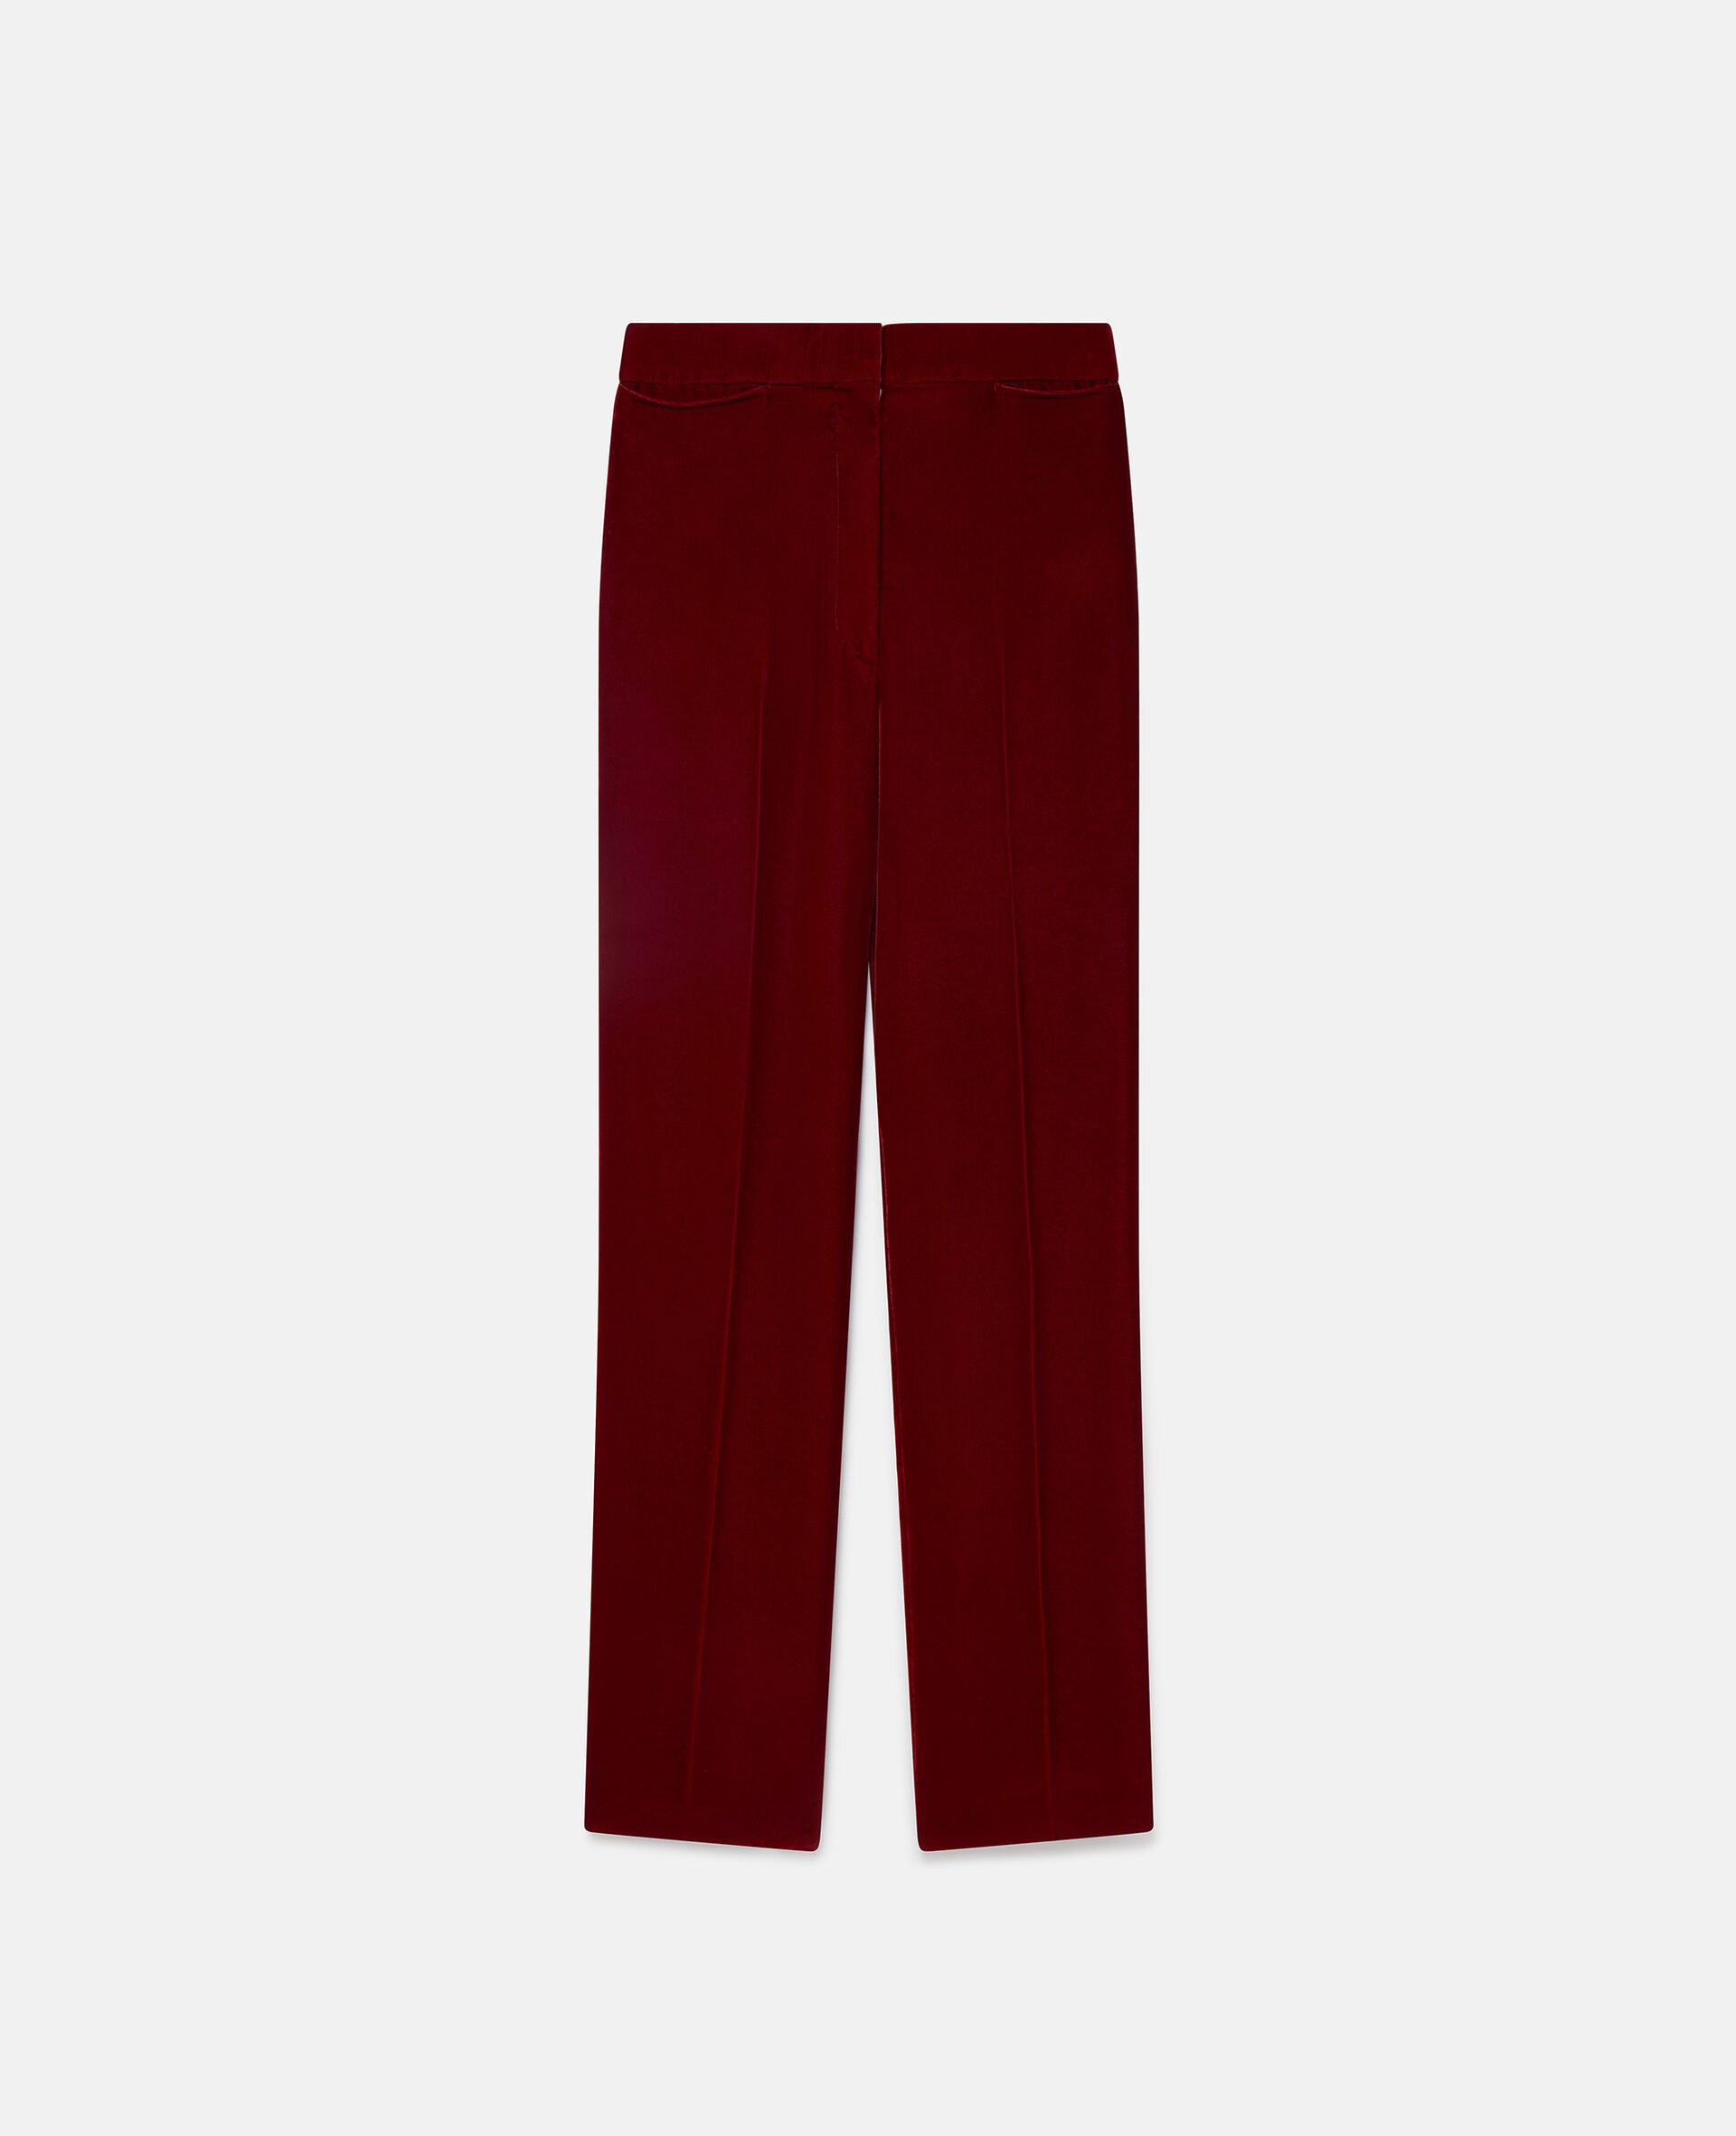 Straight Leg Tailored Trousers-Red-large image number 0